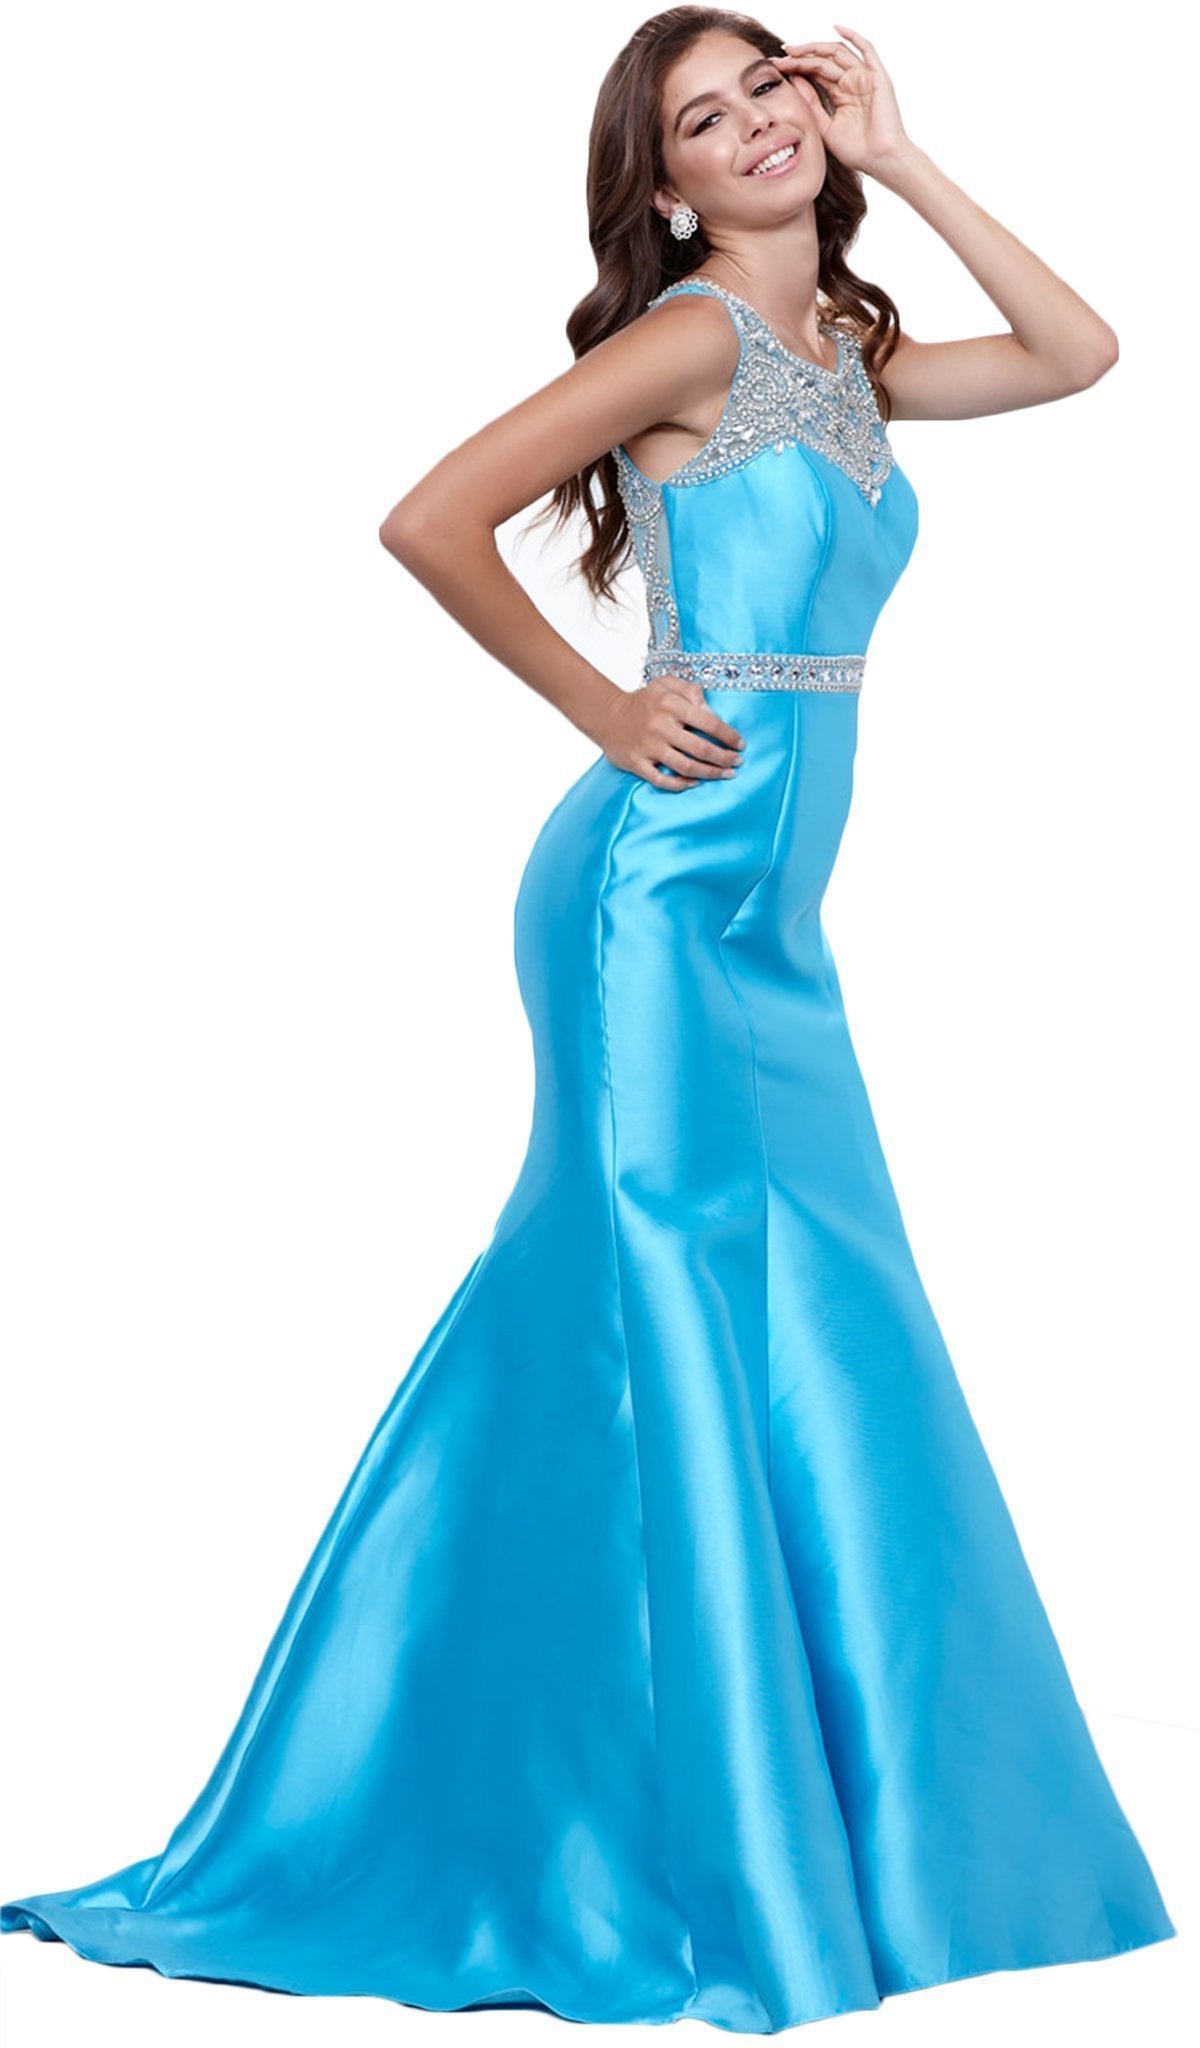 Nox Anabel - 8299 Sleeveless Gemstone Embellished Trumpet Gown Special Occasion Dress